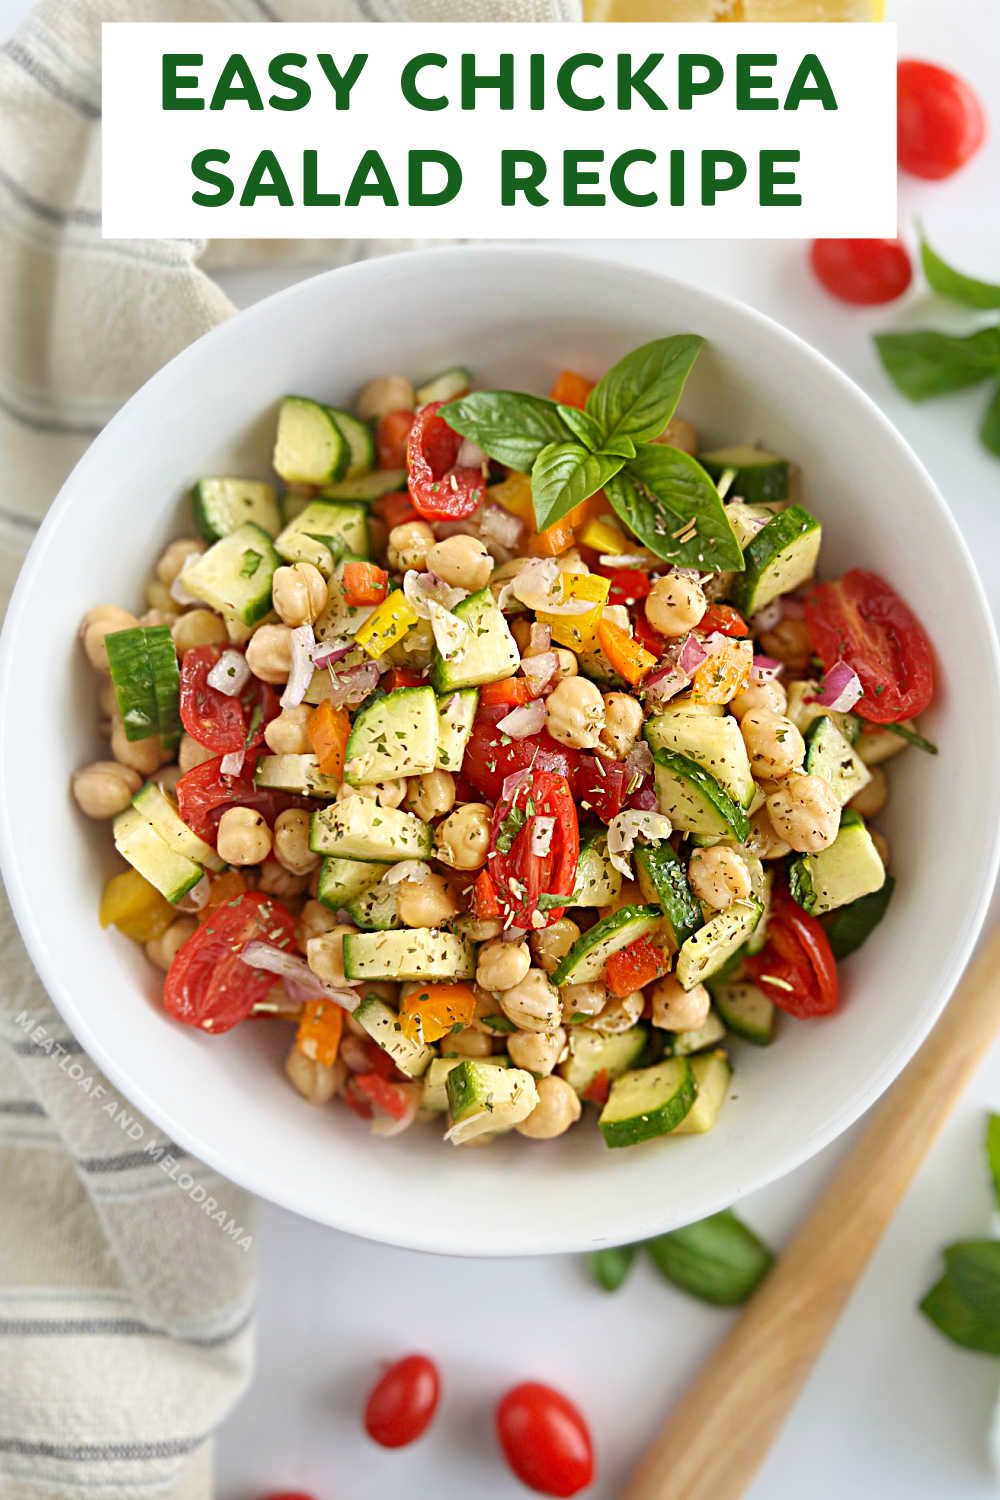 Simple Chickpea Salad Recipe with cucumbers, tomatoes and bell peppers in a quick homemade dressing is an easy high protein salad perfect for meal prep. Enjoy this easy garbanzo bean salad for a delicious lunch, or add grilled chicken for a complete meal. via @meamel